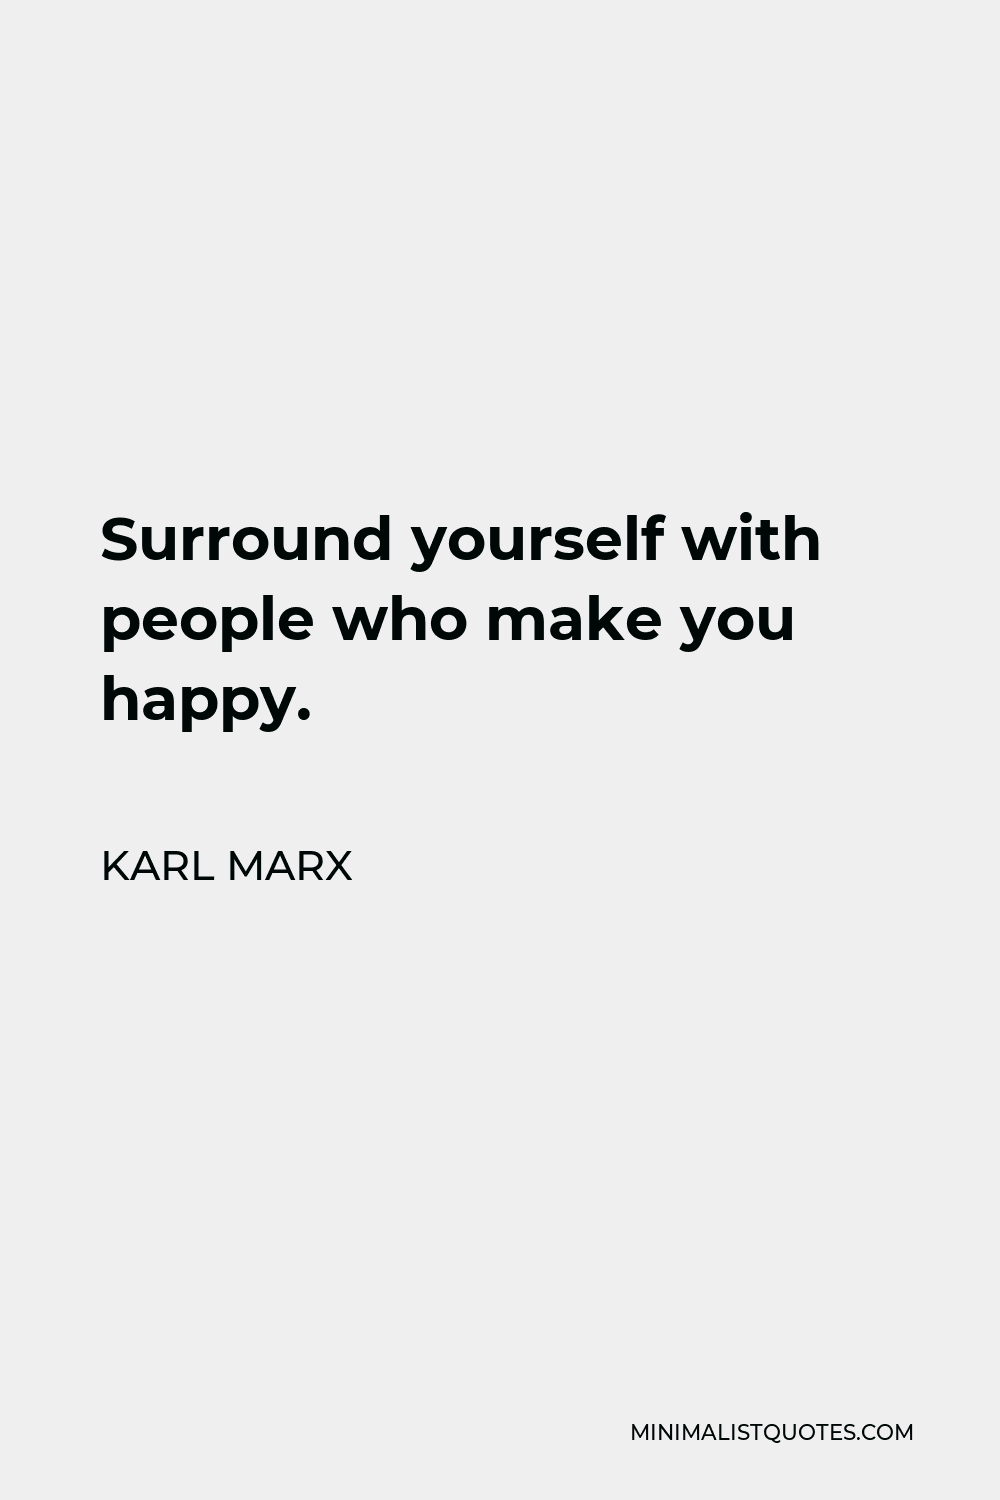 Karl Marx Quote - Surround yourself with people who make you happy.